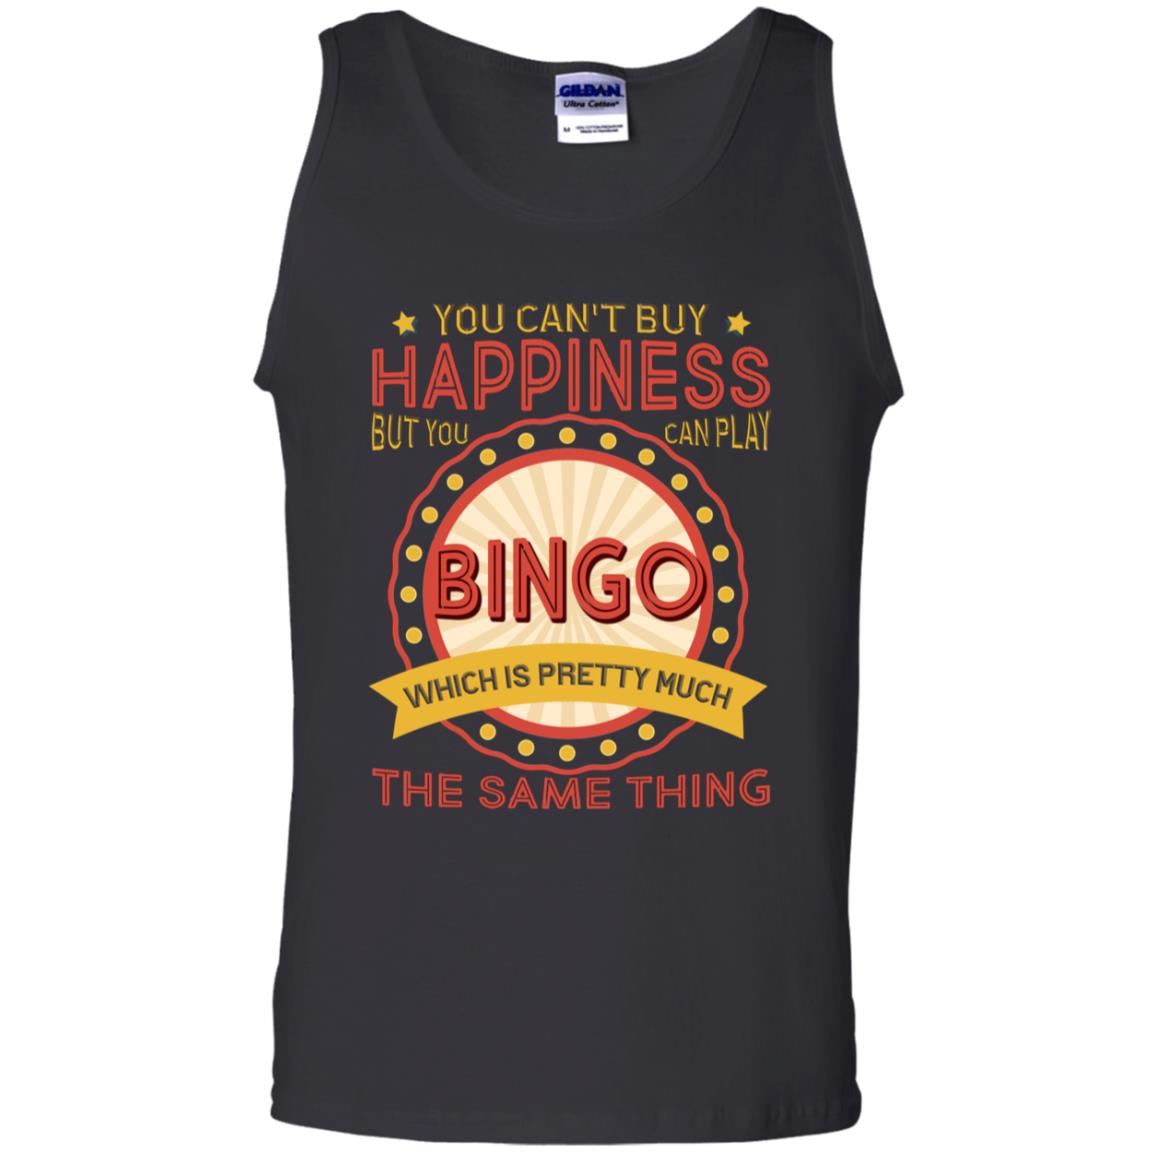 You Can't Buy Happiness But You Can Play Bingo Which Pretty Much The Same Thing ShirtG220 Gildan 100% Cotton Tank Top